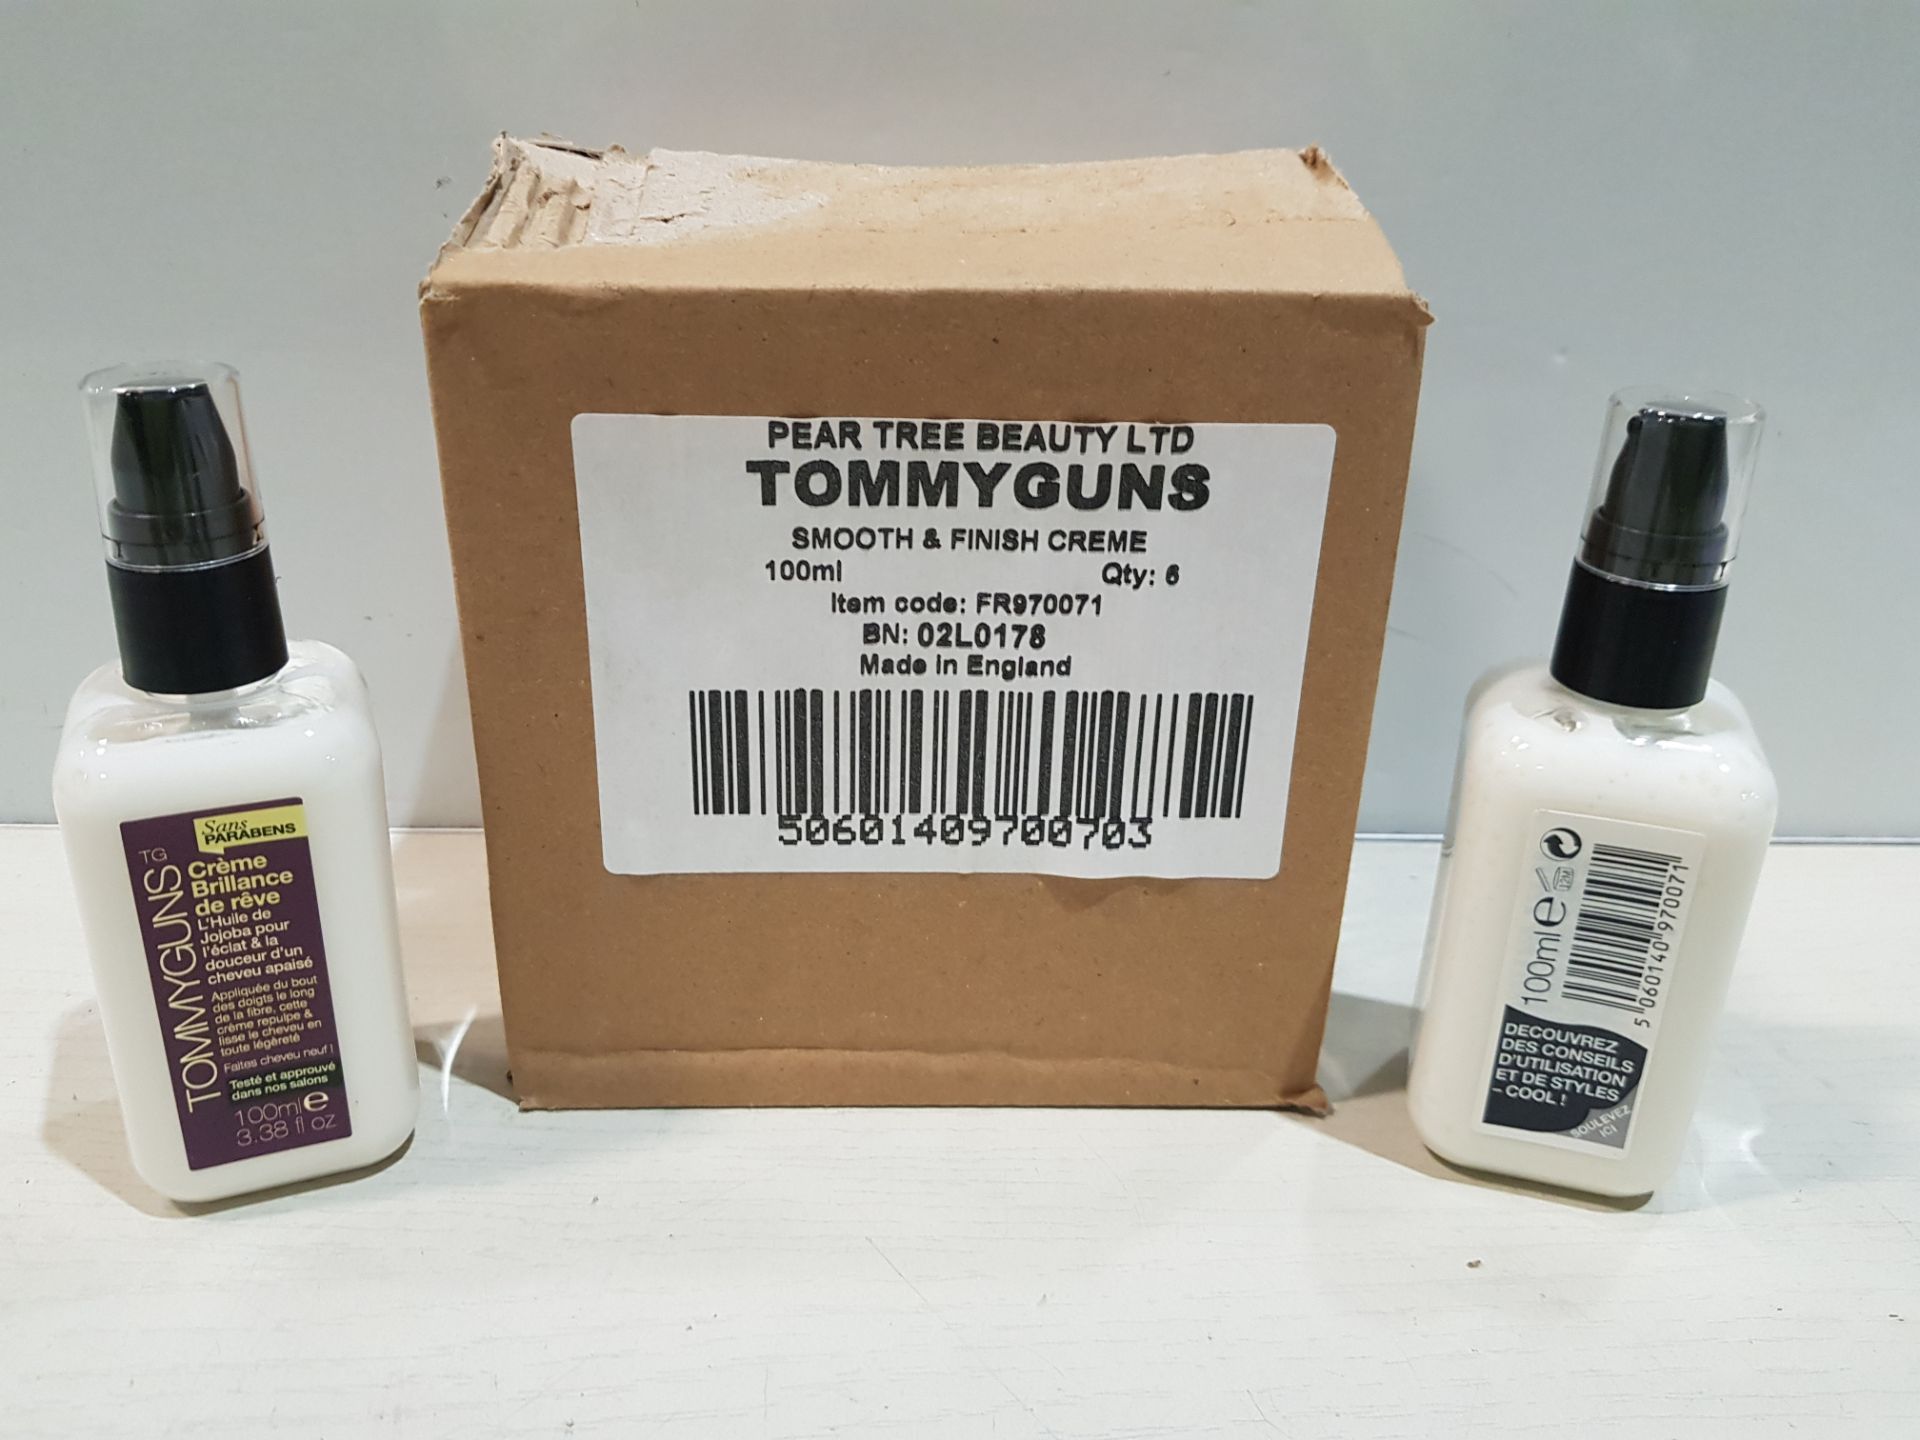 120 X BRAND NEW TOMMYGUNS SMOOTH & FINISH CREME 100ML QTY 6 IN ONE BOX 20 BOXES IN TOTAL.